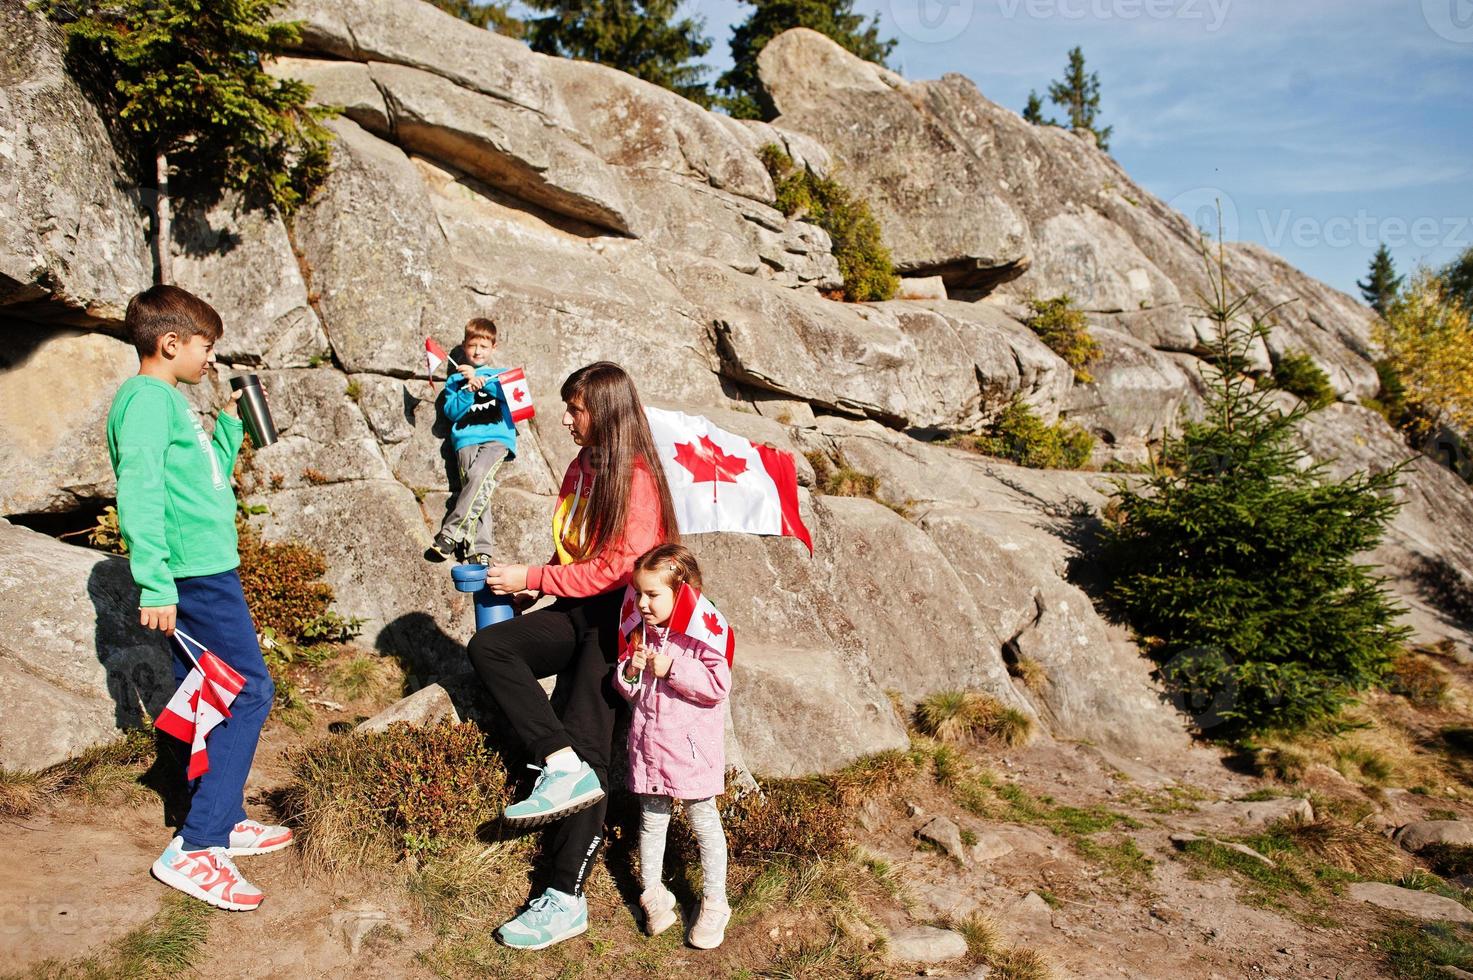 Happy Canada Day. Family of mother with three kids hold large Canadian flag celebration in mountains. photo